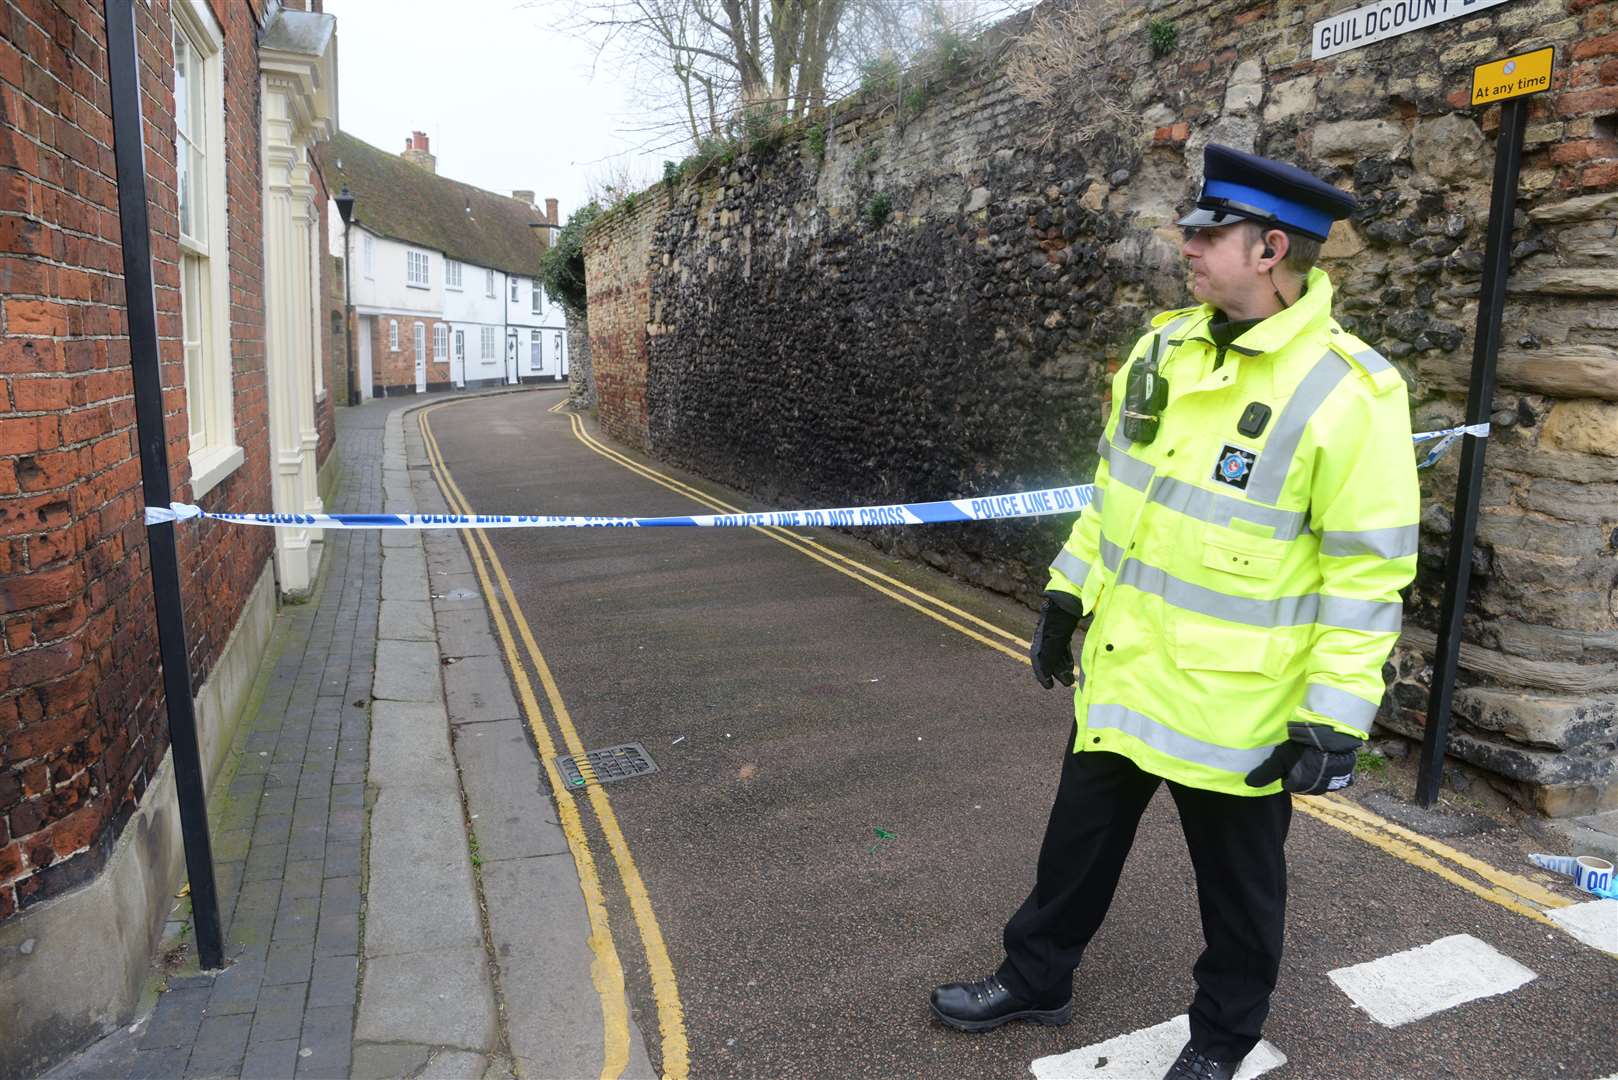 Police closed off Guildcount Lane, Sandwich following an incident on Wednesday afternoon.